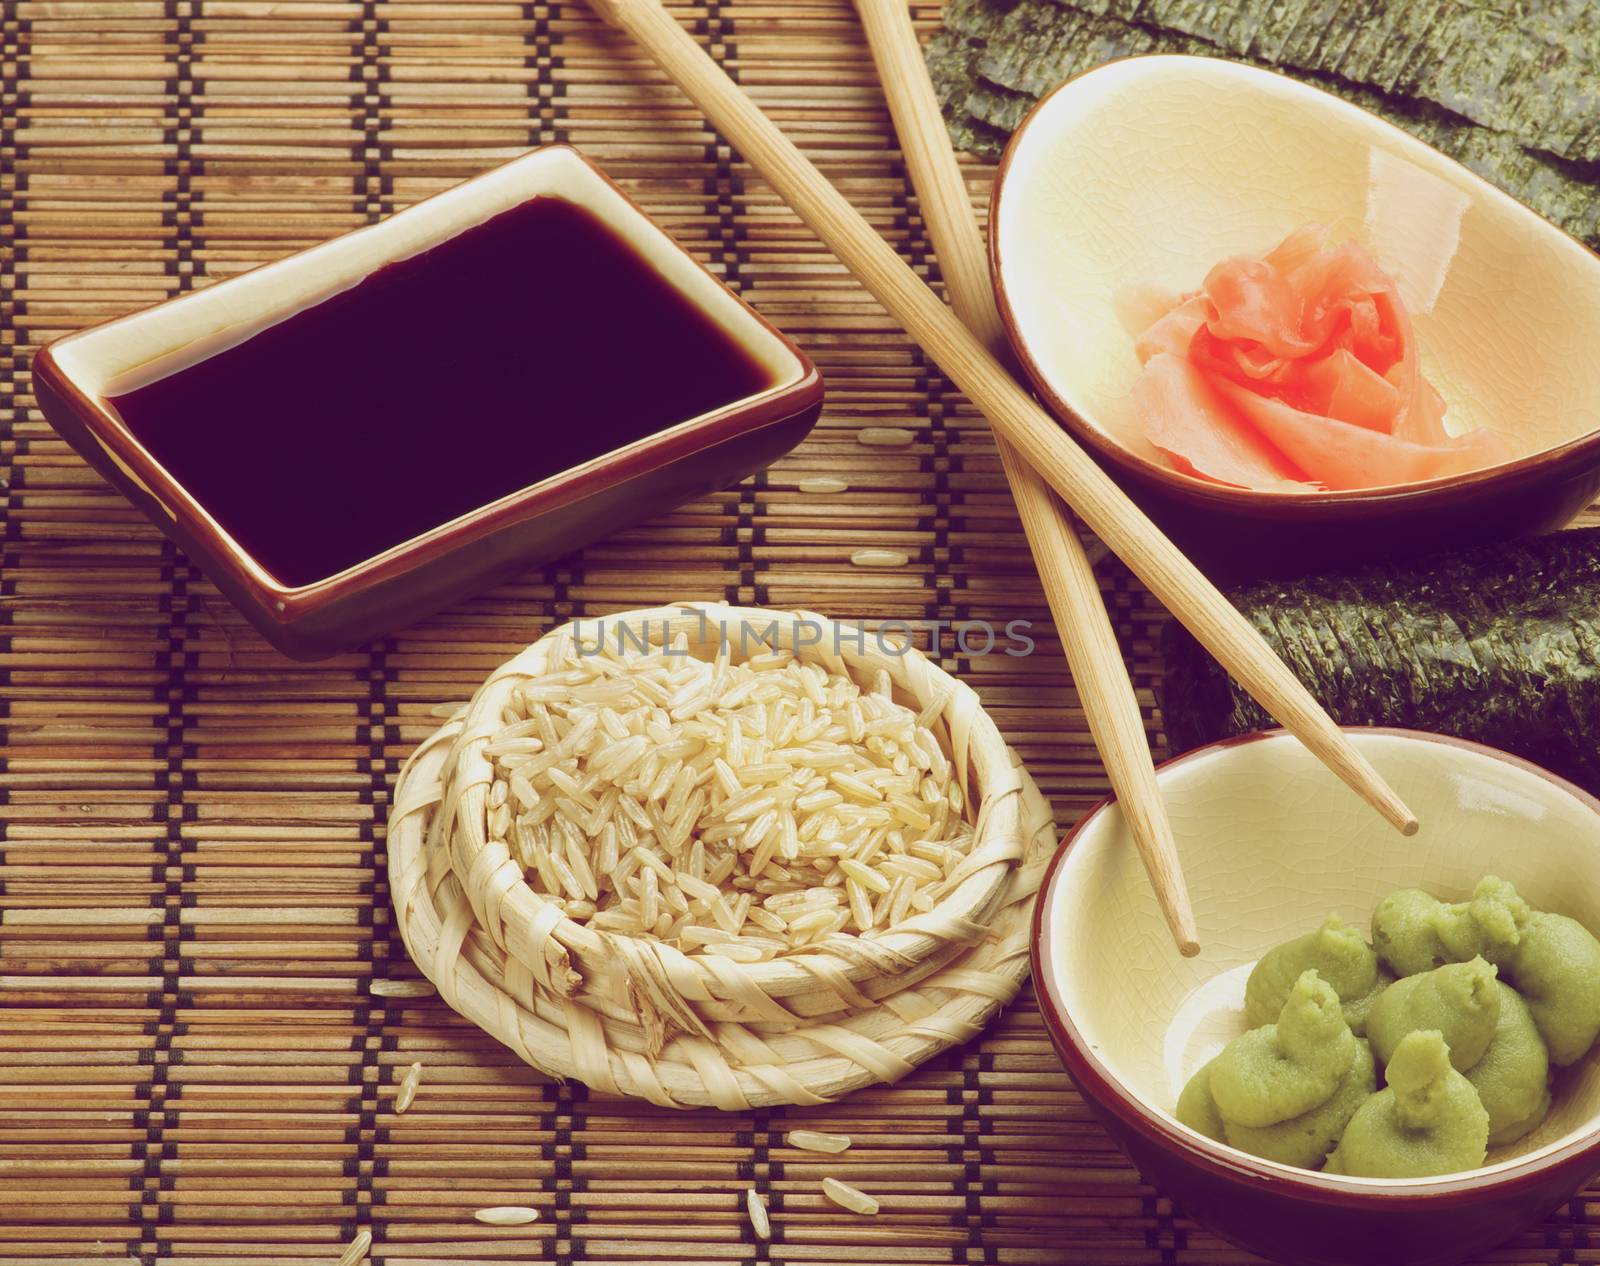 Ingredients to Preparing Sushi with Nori, Ginger, Wasabi, Rice, Soy Sauce and Two Chopsticks on Bamboo Straw Matю Retro Styled